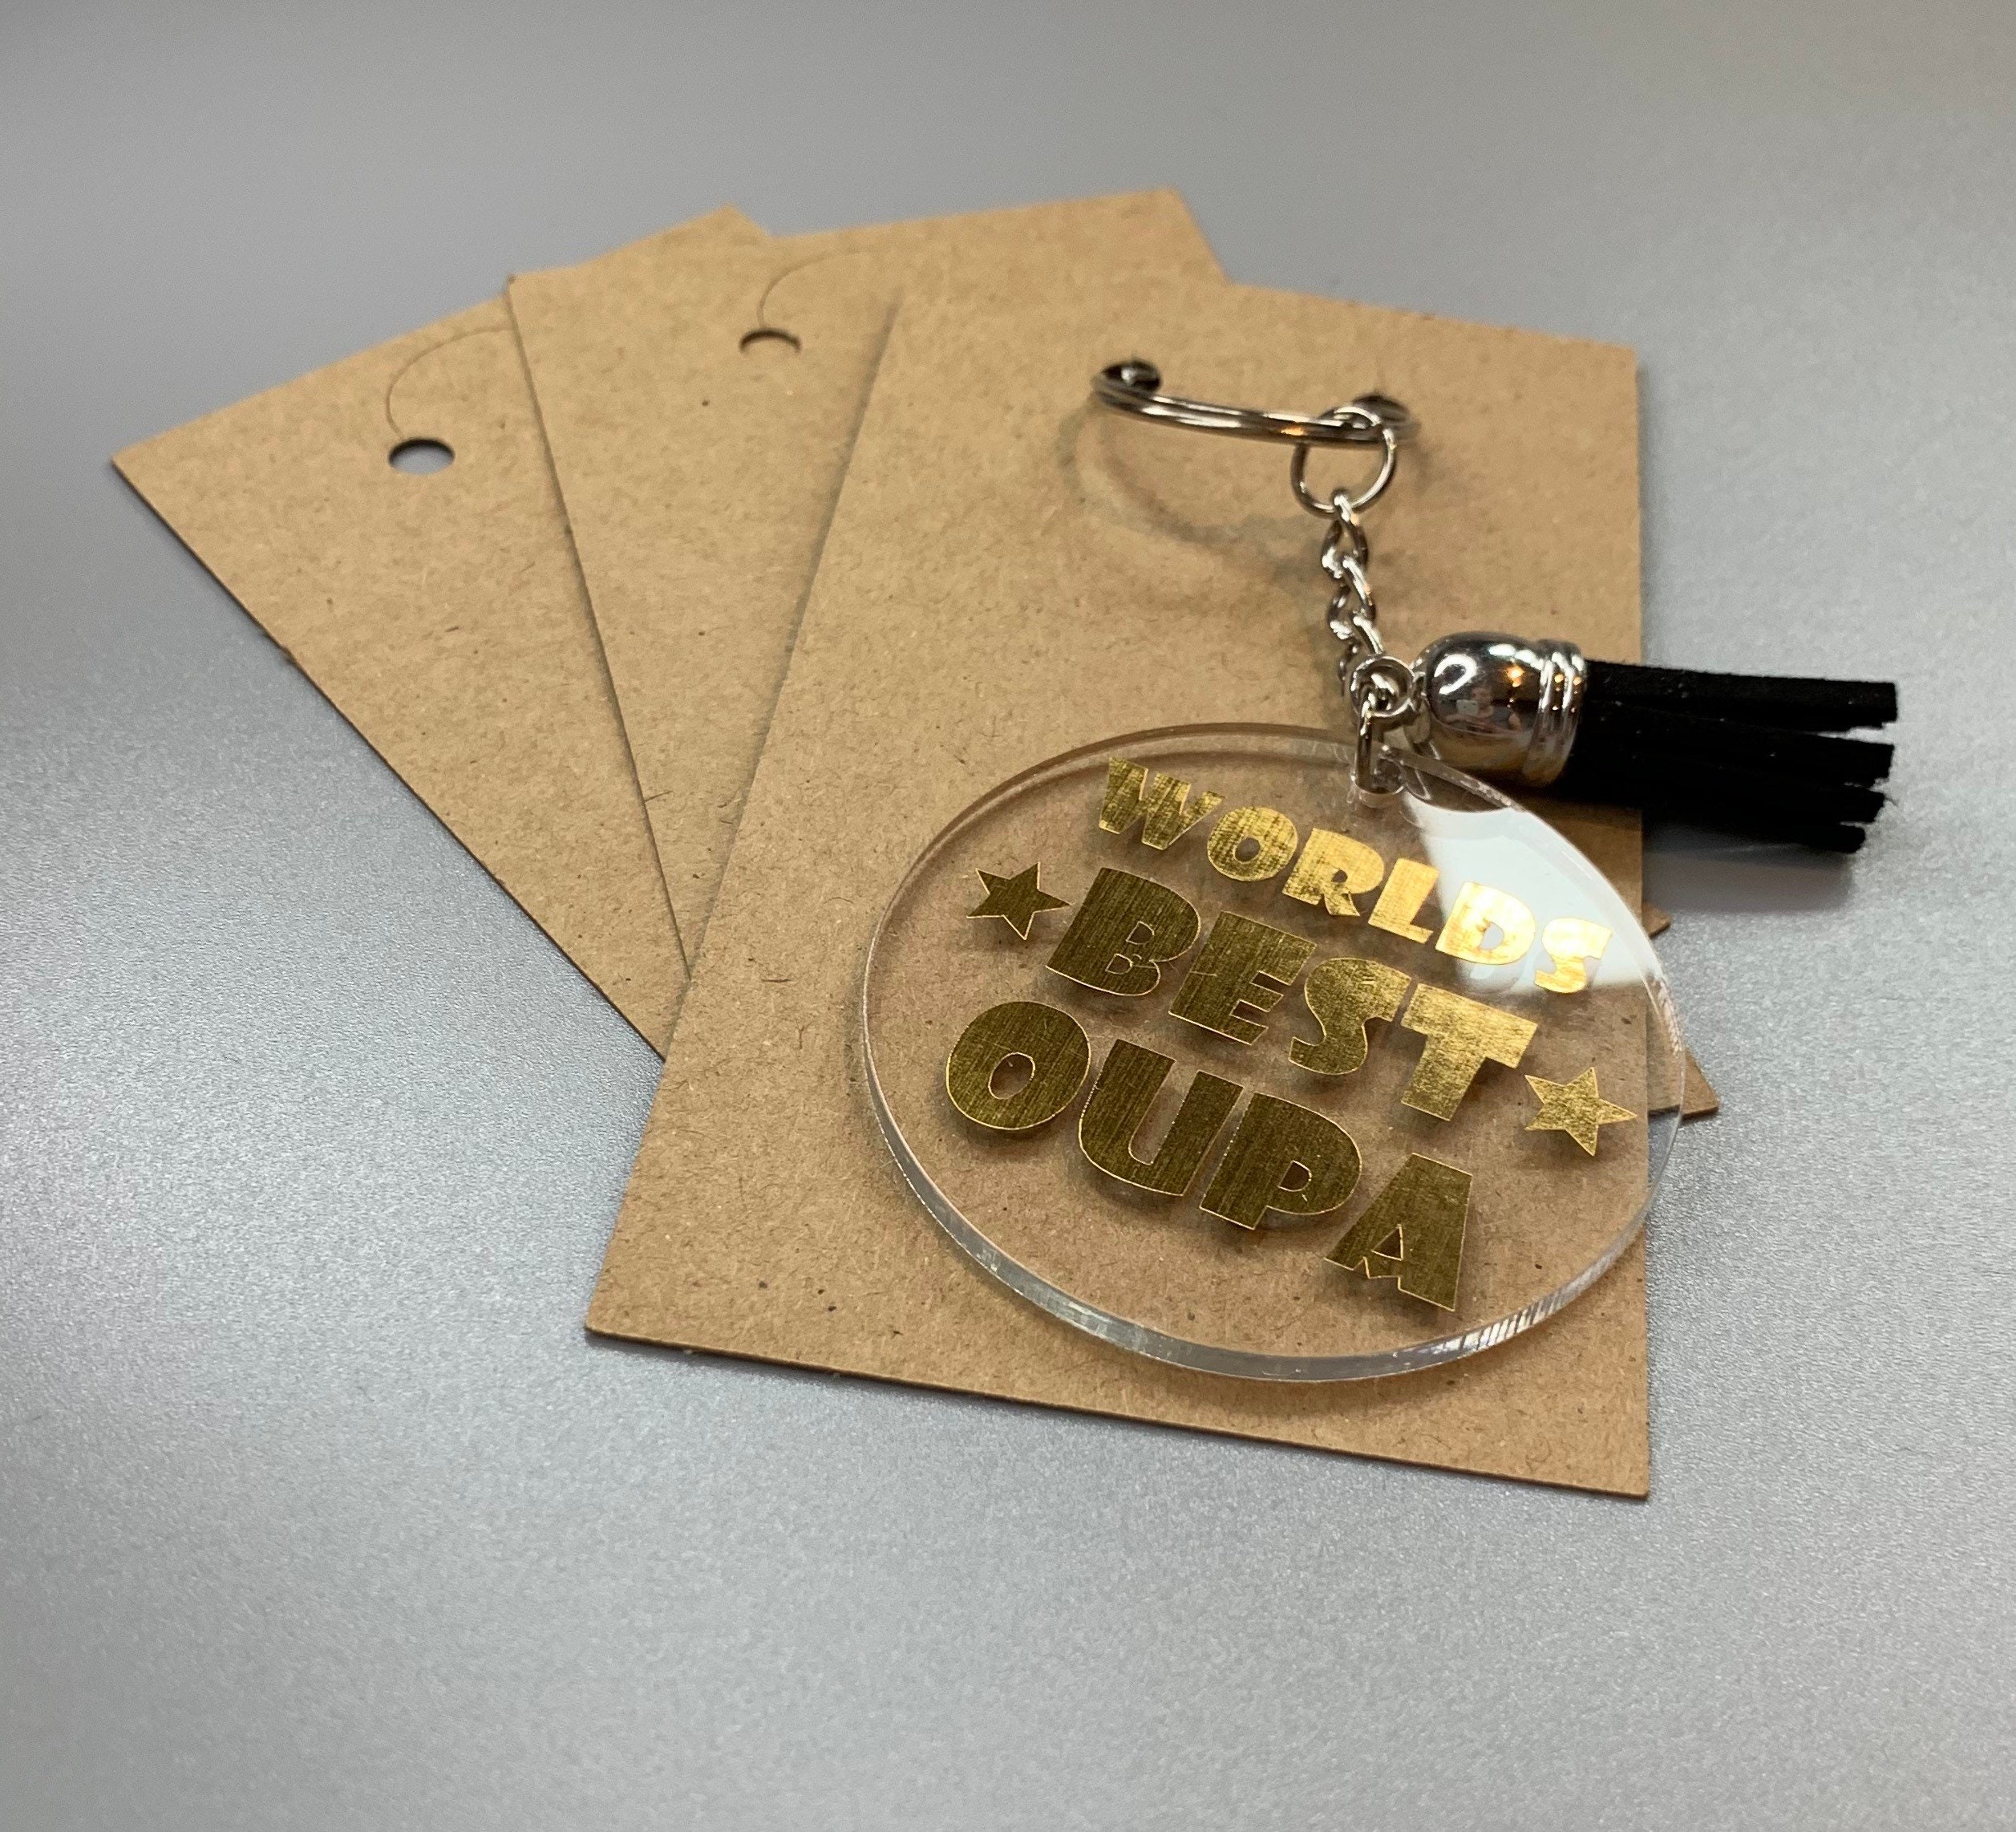 Keychain Display Cards with Self Sealing Bags for Cards Jewelry Packaging